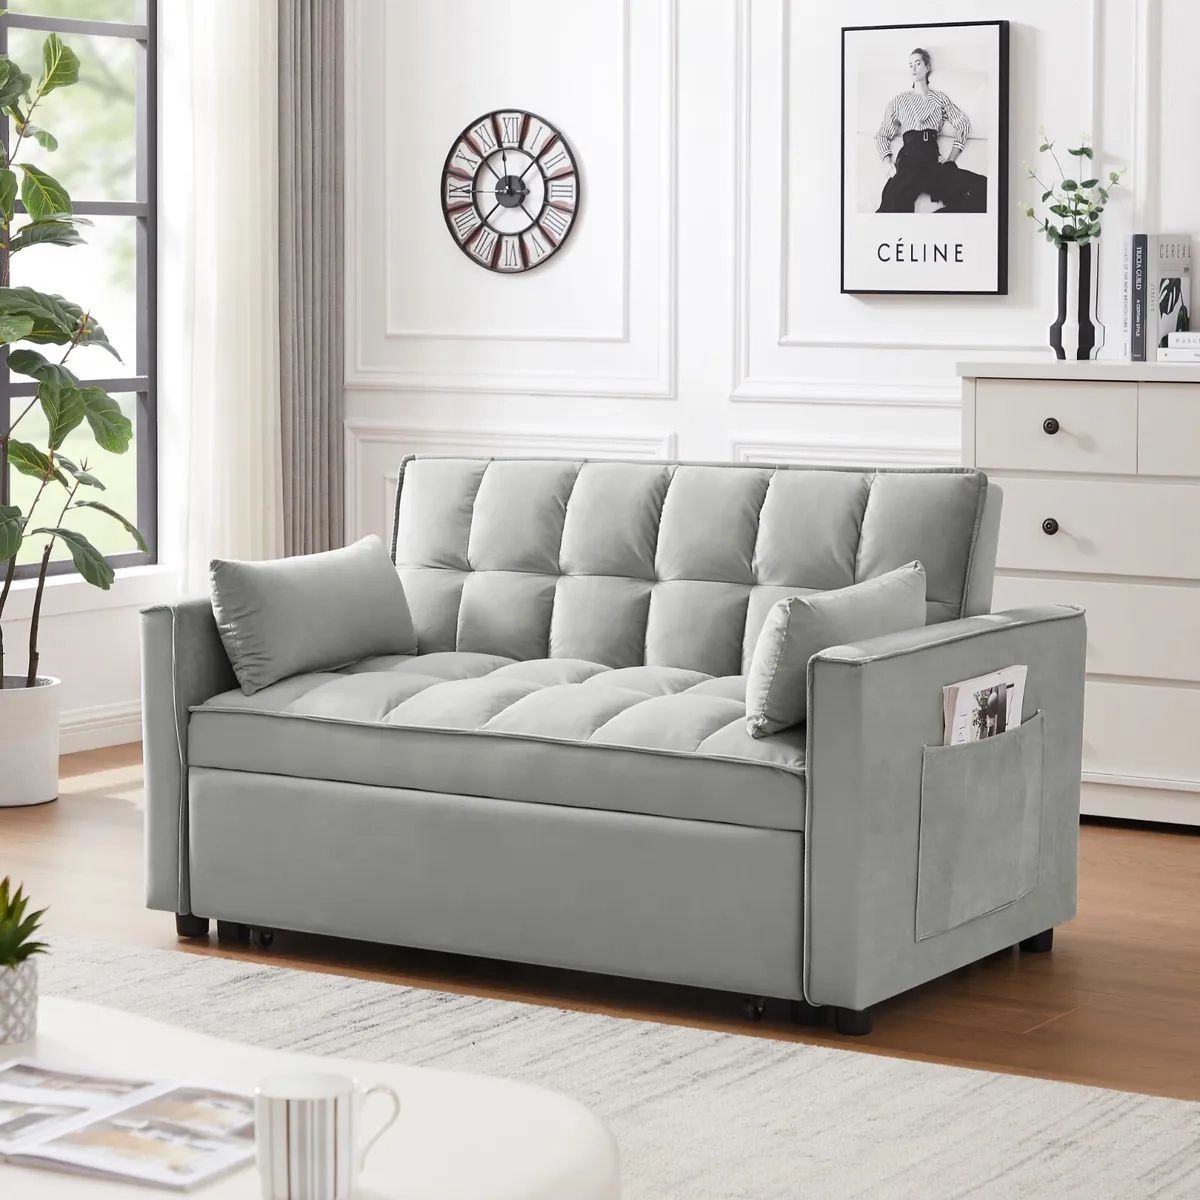 Velvet Futon Sofa Bed With 2 Pillows Convertible Sofa Bed Pull Out Couch  Gray | Ebay With Regard To 2 In 1 Gray Pull Out Sofa Beds (View 7 of 15)